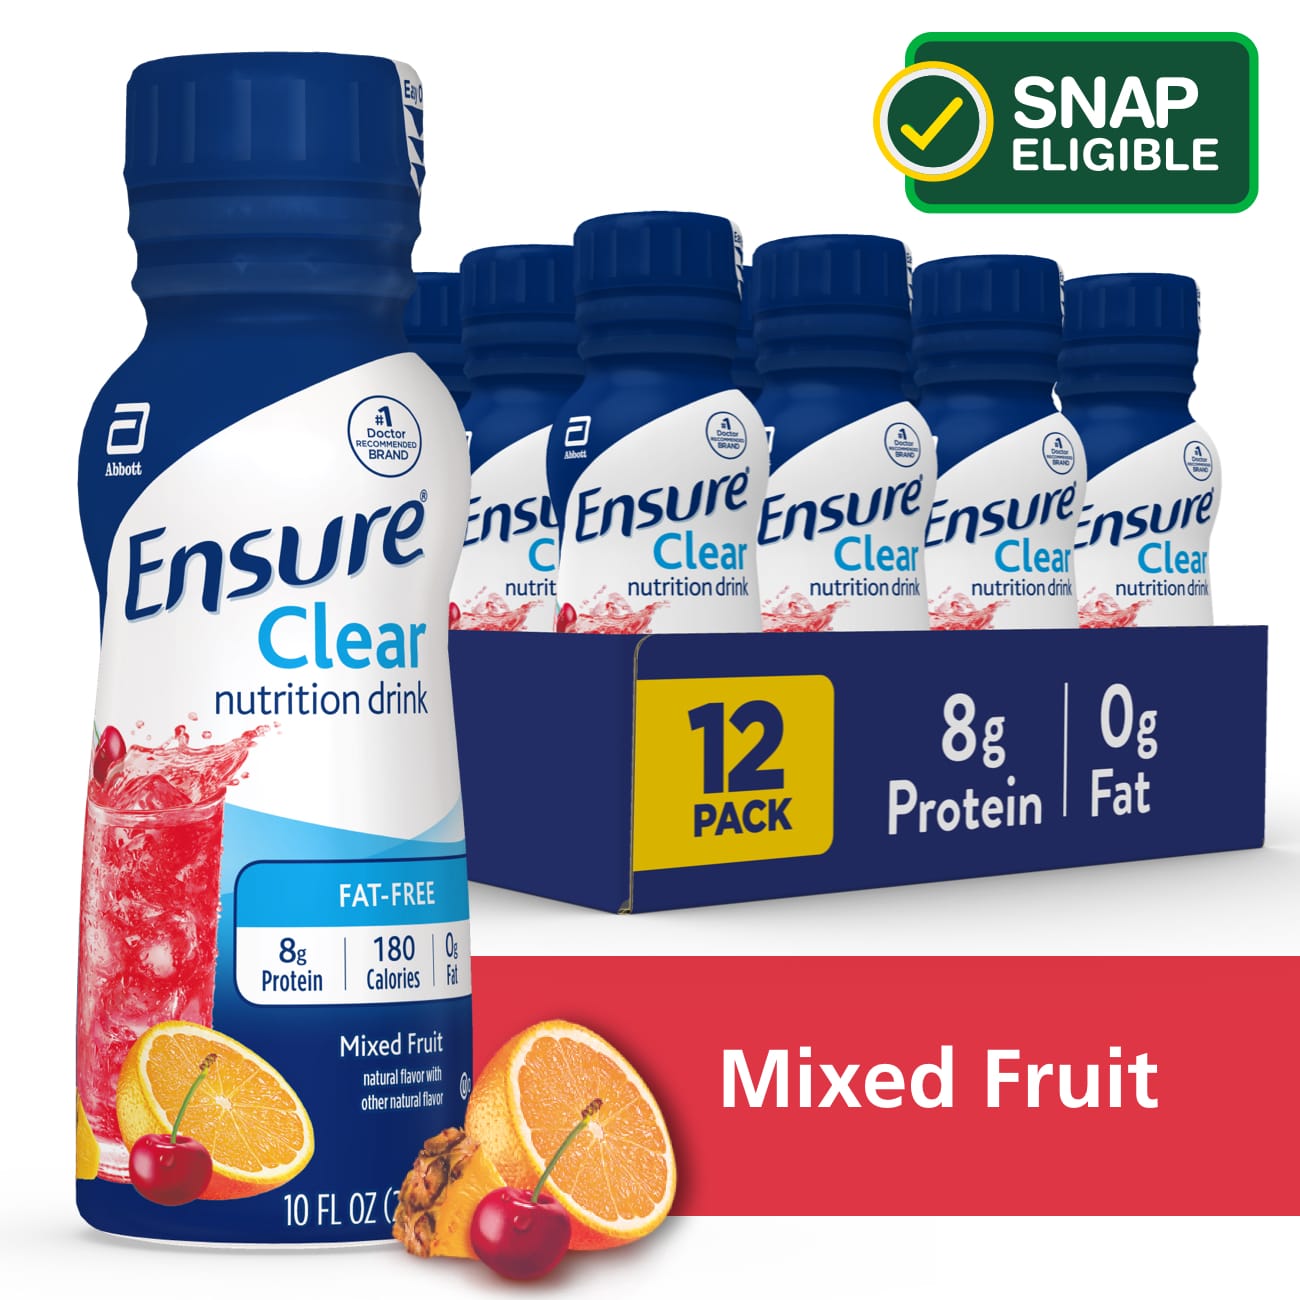 Ensure Clear Nutrition Drink, Mixed Fruit, 10 fl oz, 12 Count - image 1 of 8